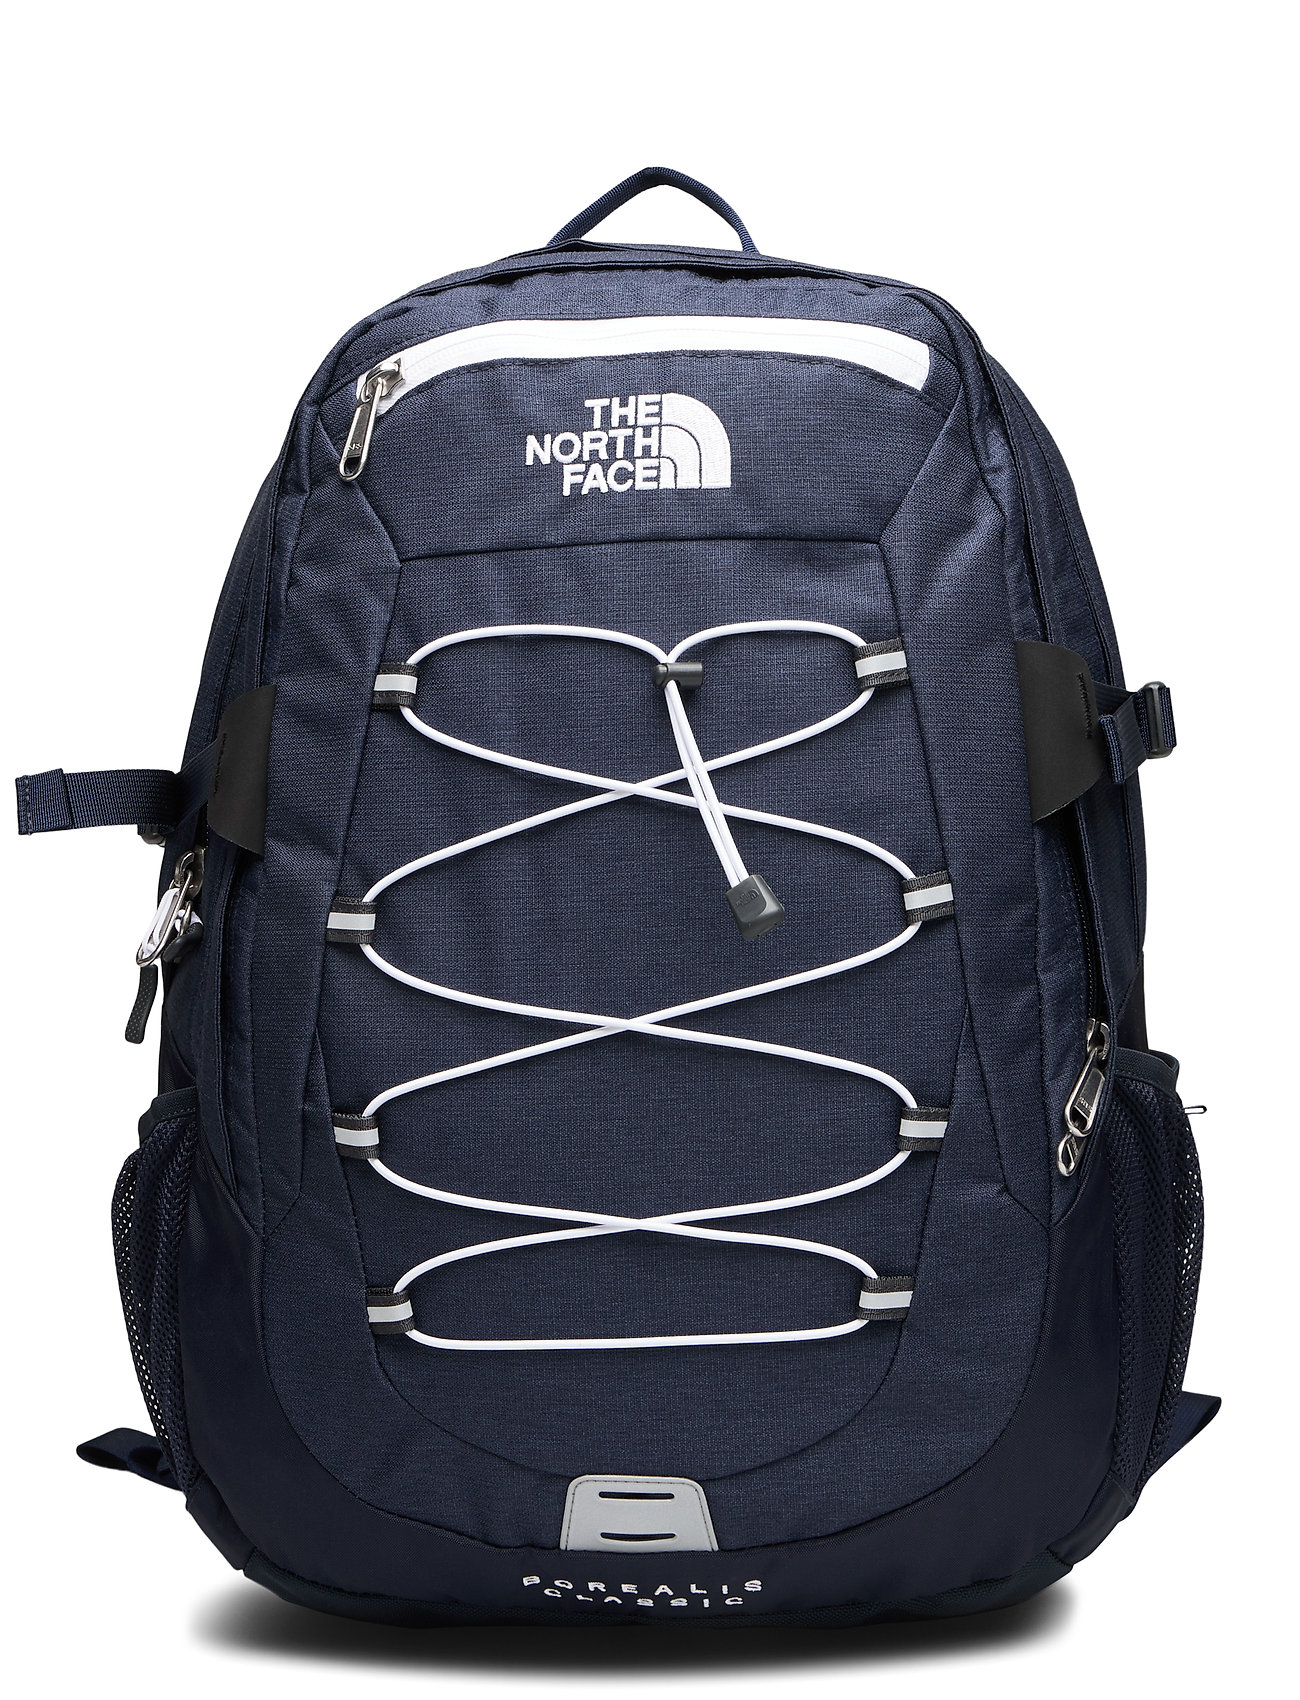 The North Face Borealis Classic Store, 51% OFF | www.hcb.cat